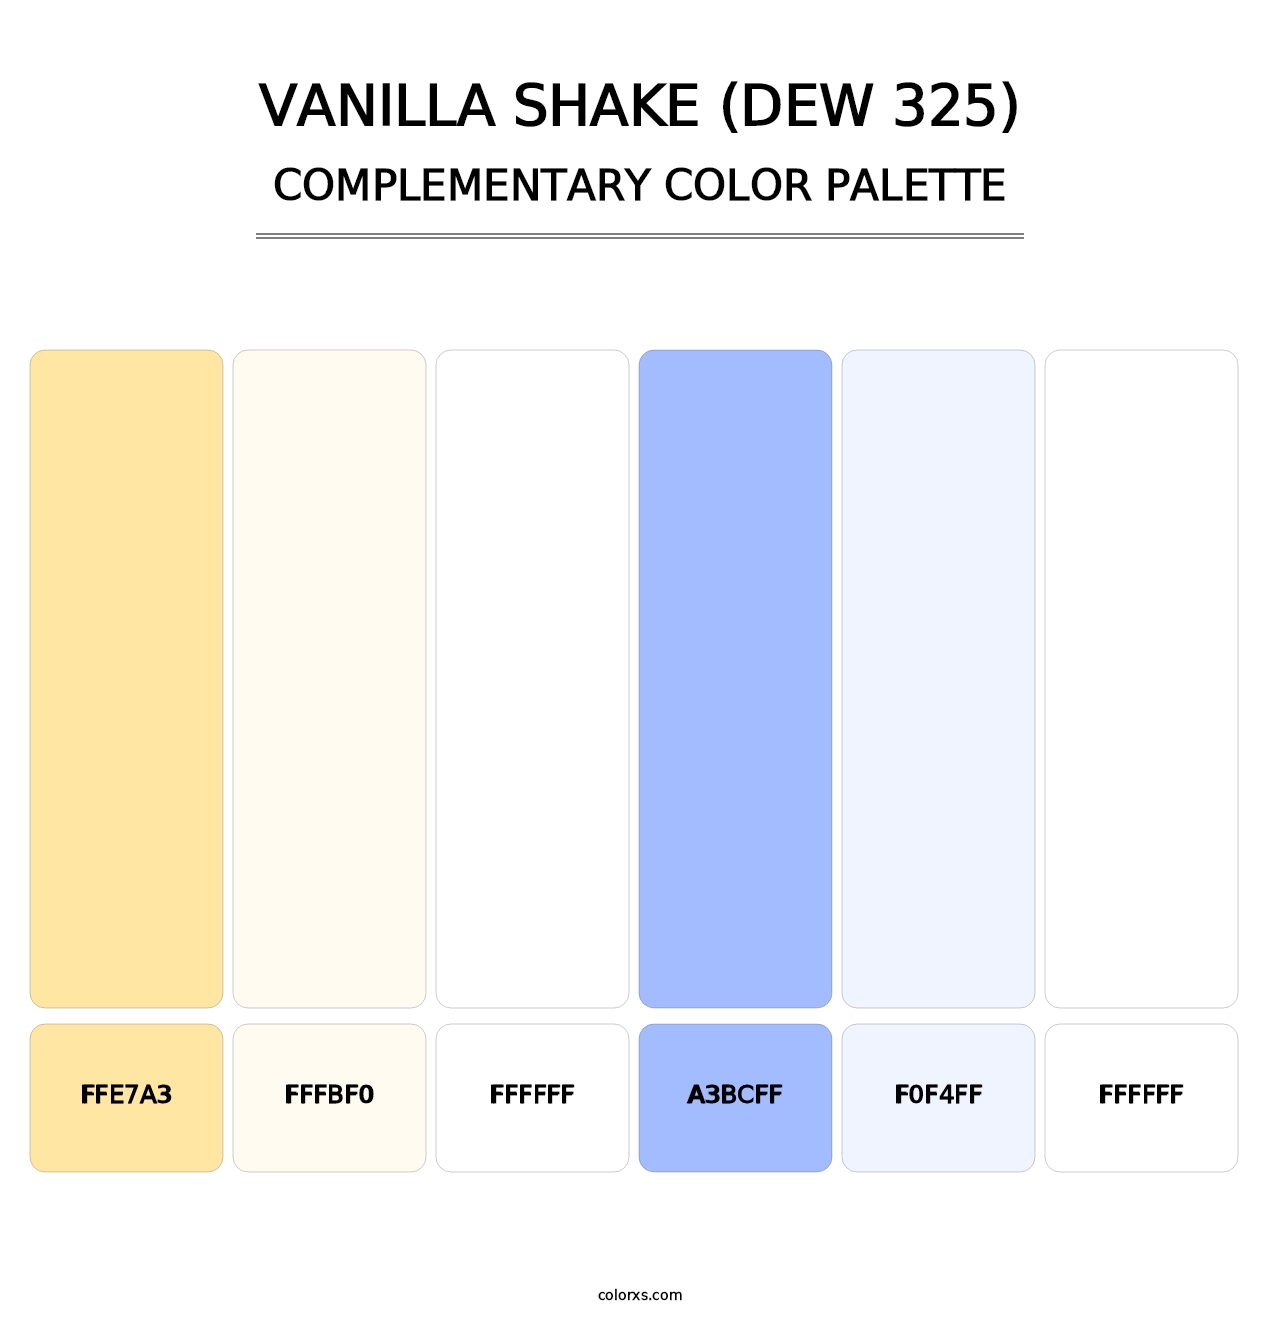 Vanilla Shake (DEW 325) - Complementary Color Palette